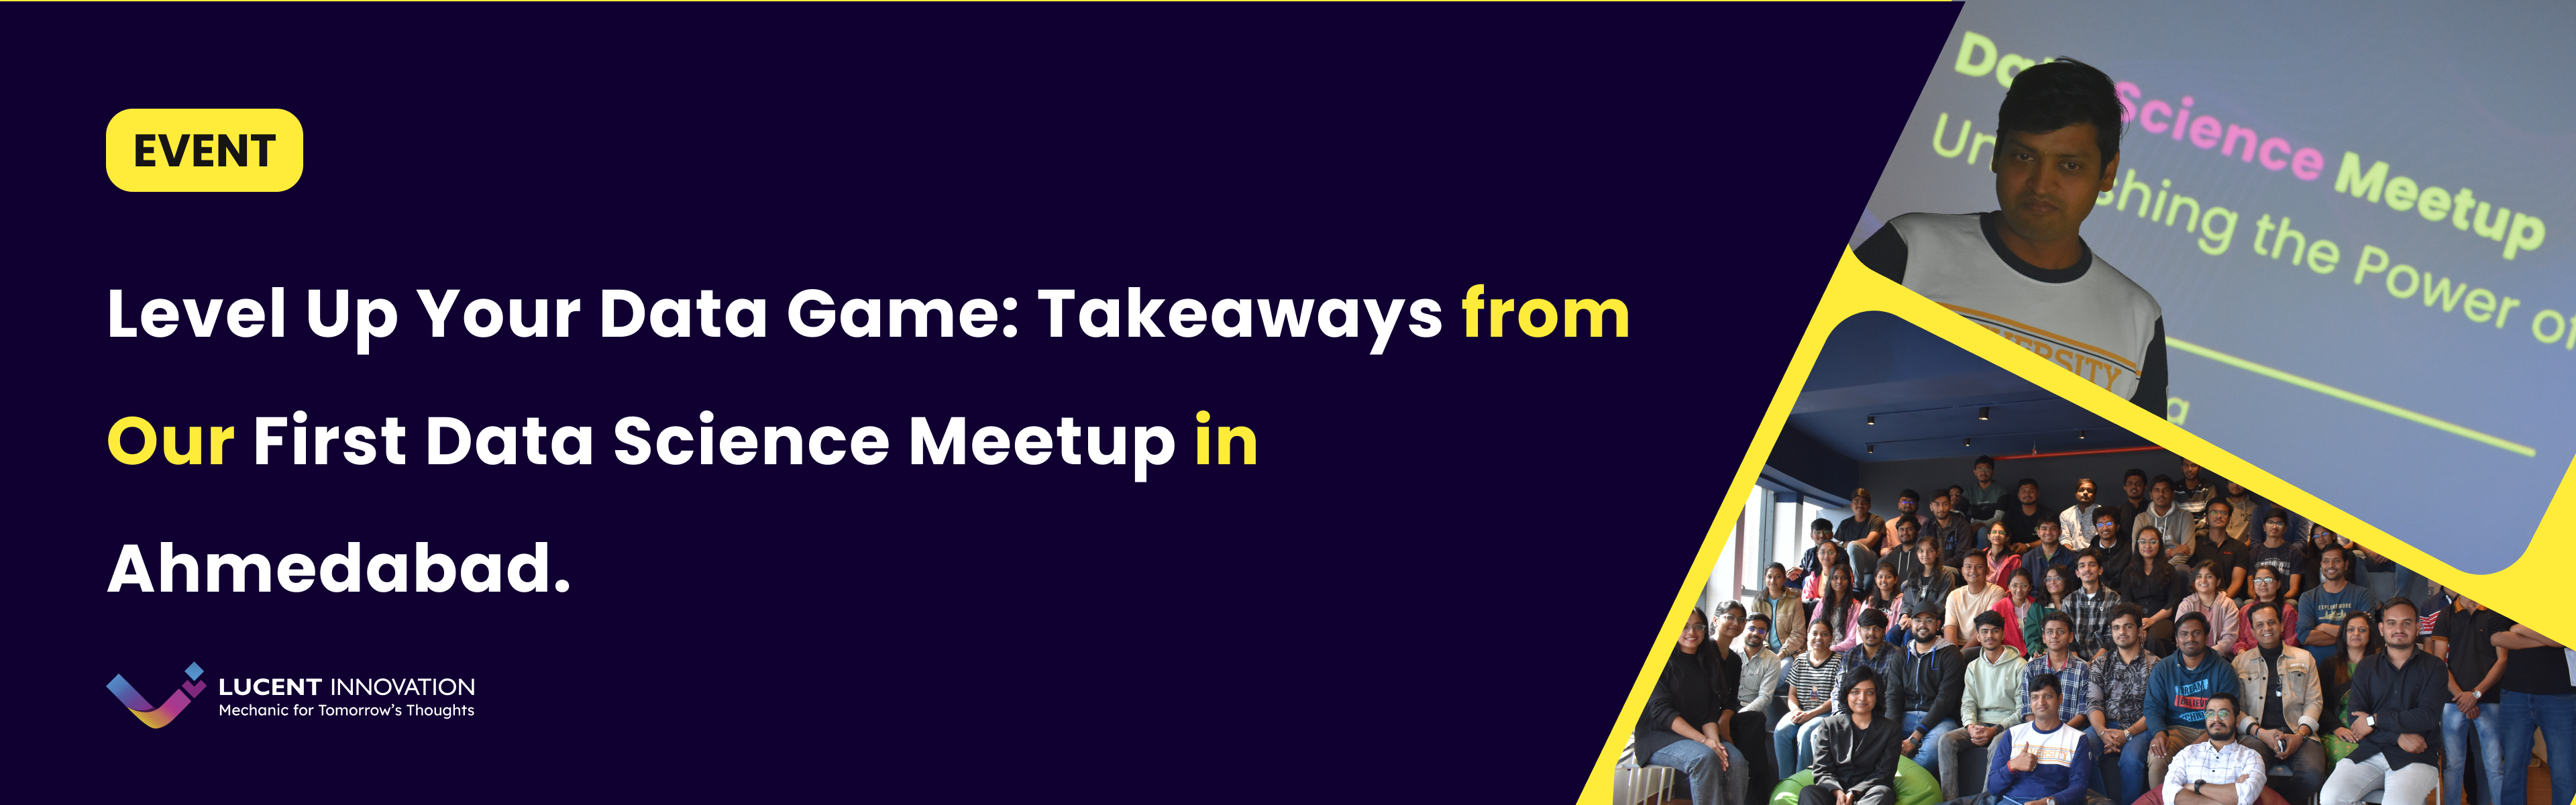 Level Up Your Data Game: Takeaways from Our First Data Science Meetup in Ahmedabad